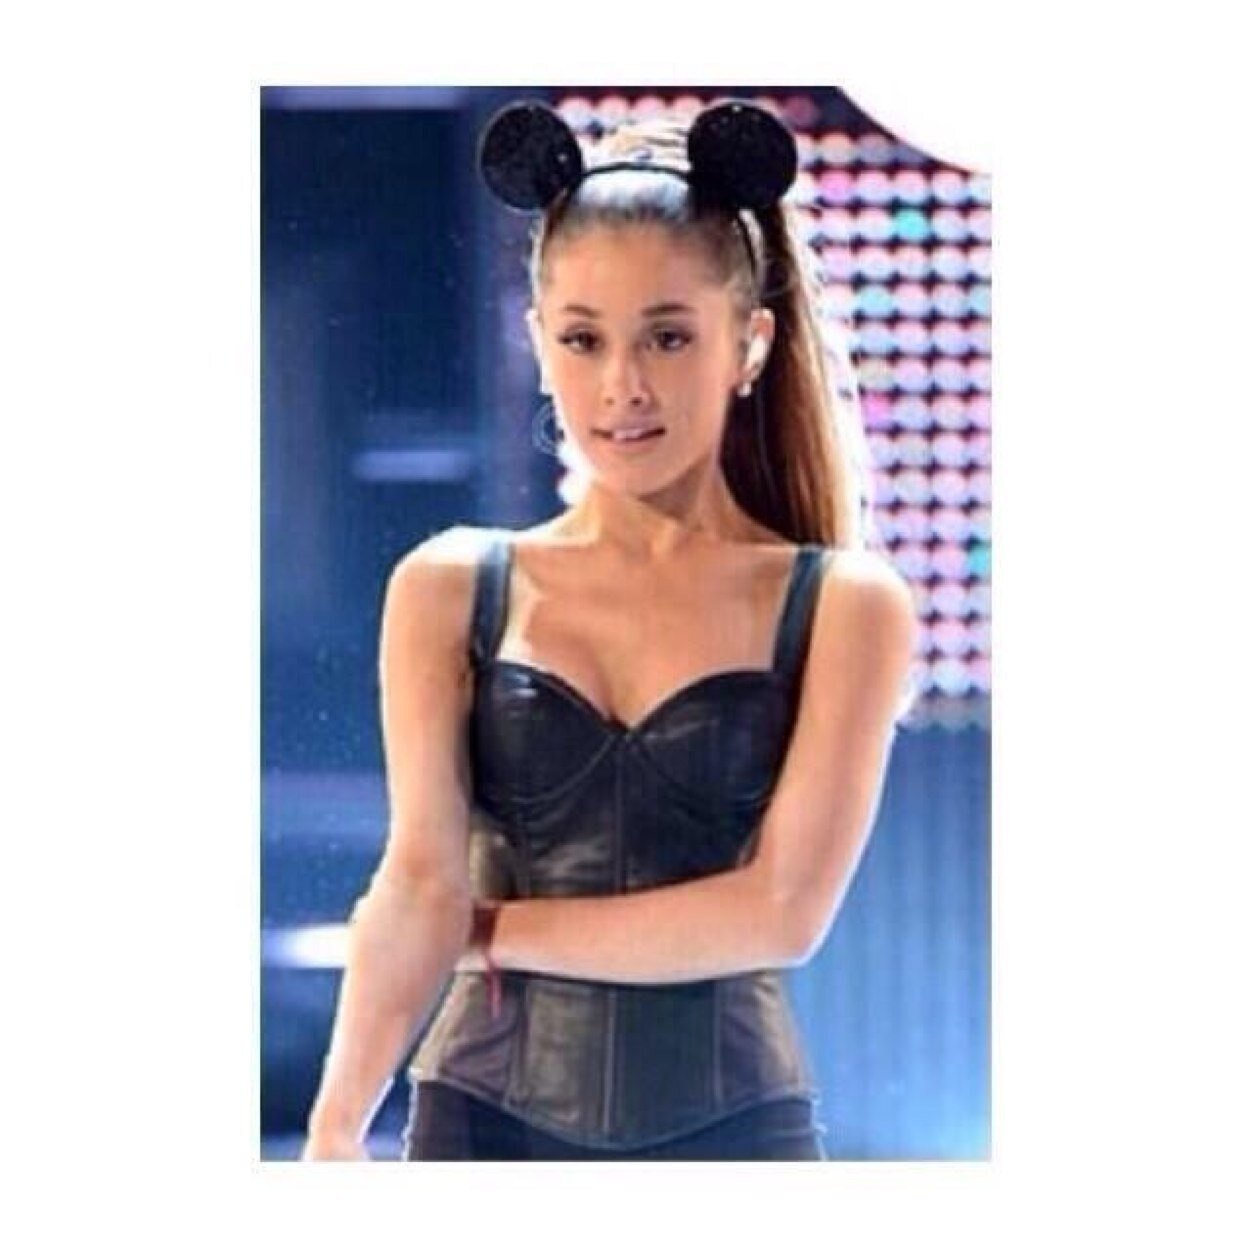 @arianagrande Love her with all my heart
Account since 1.5.14